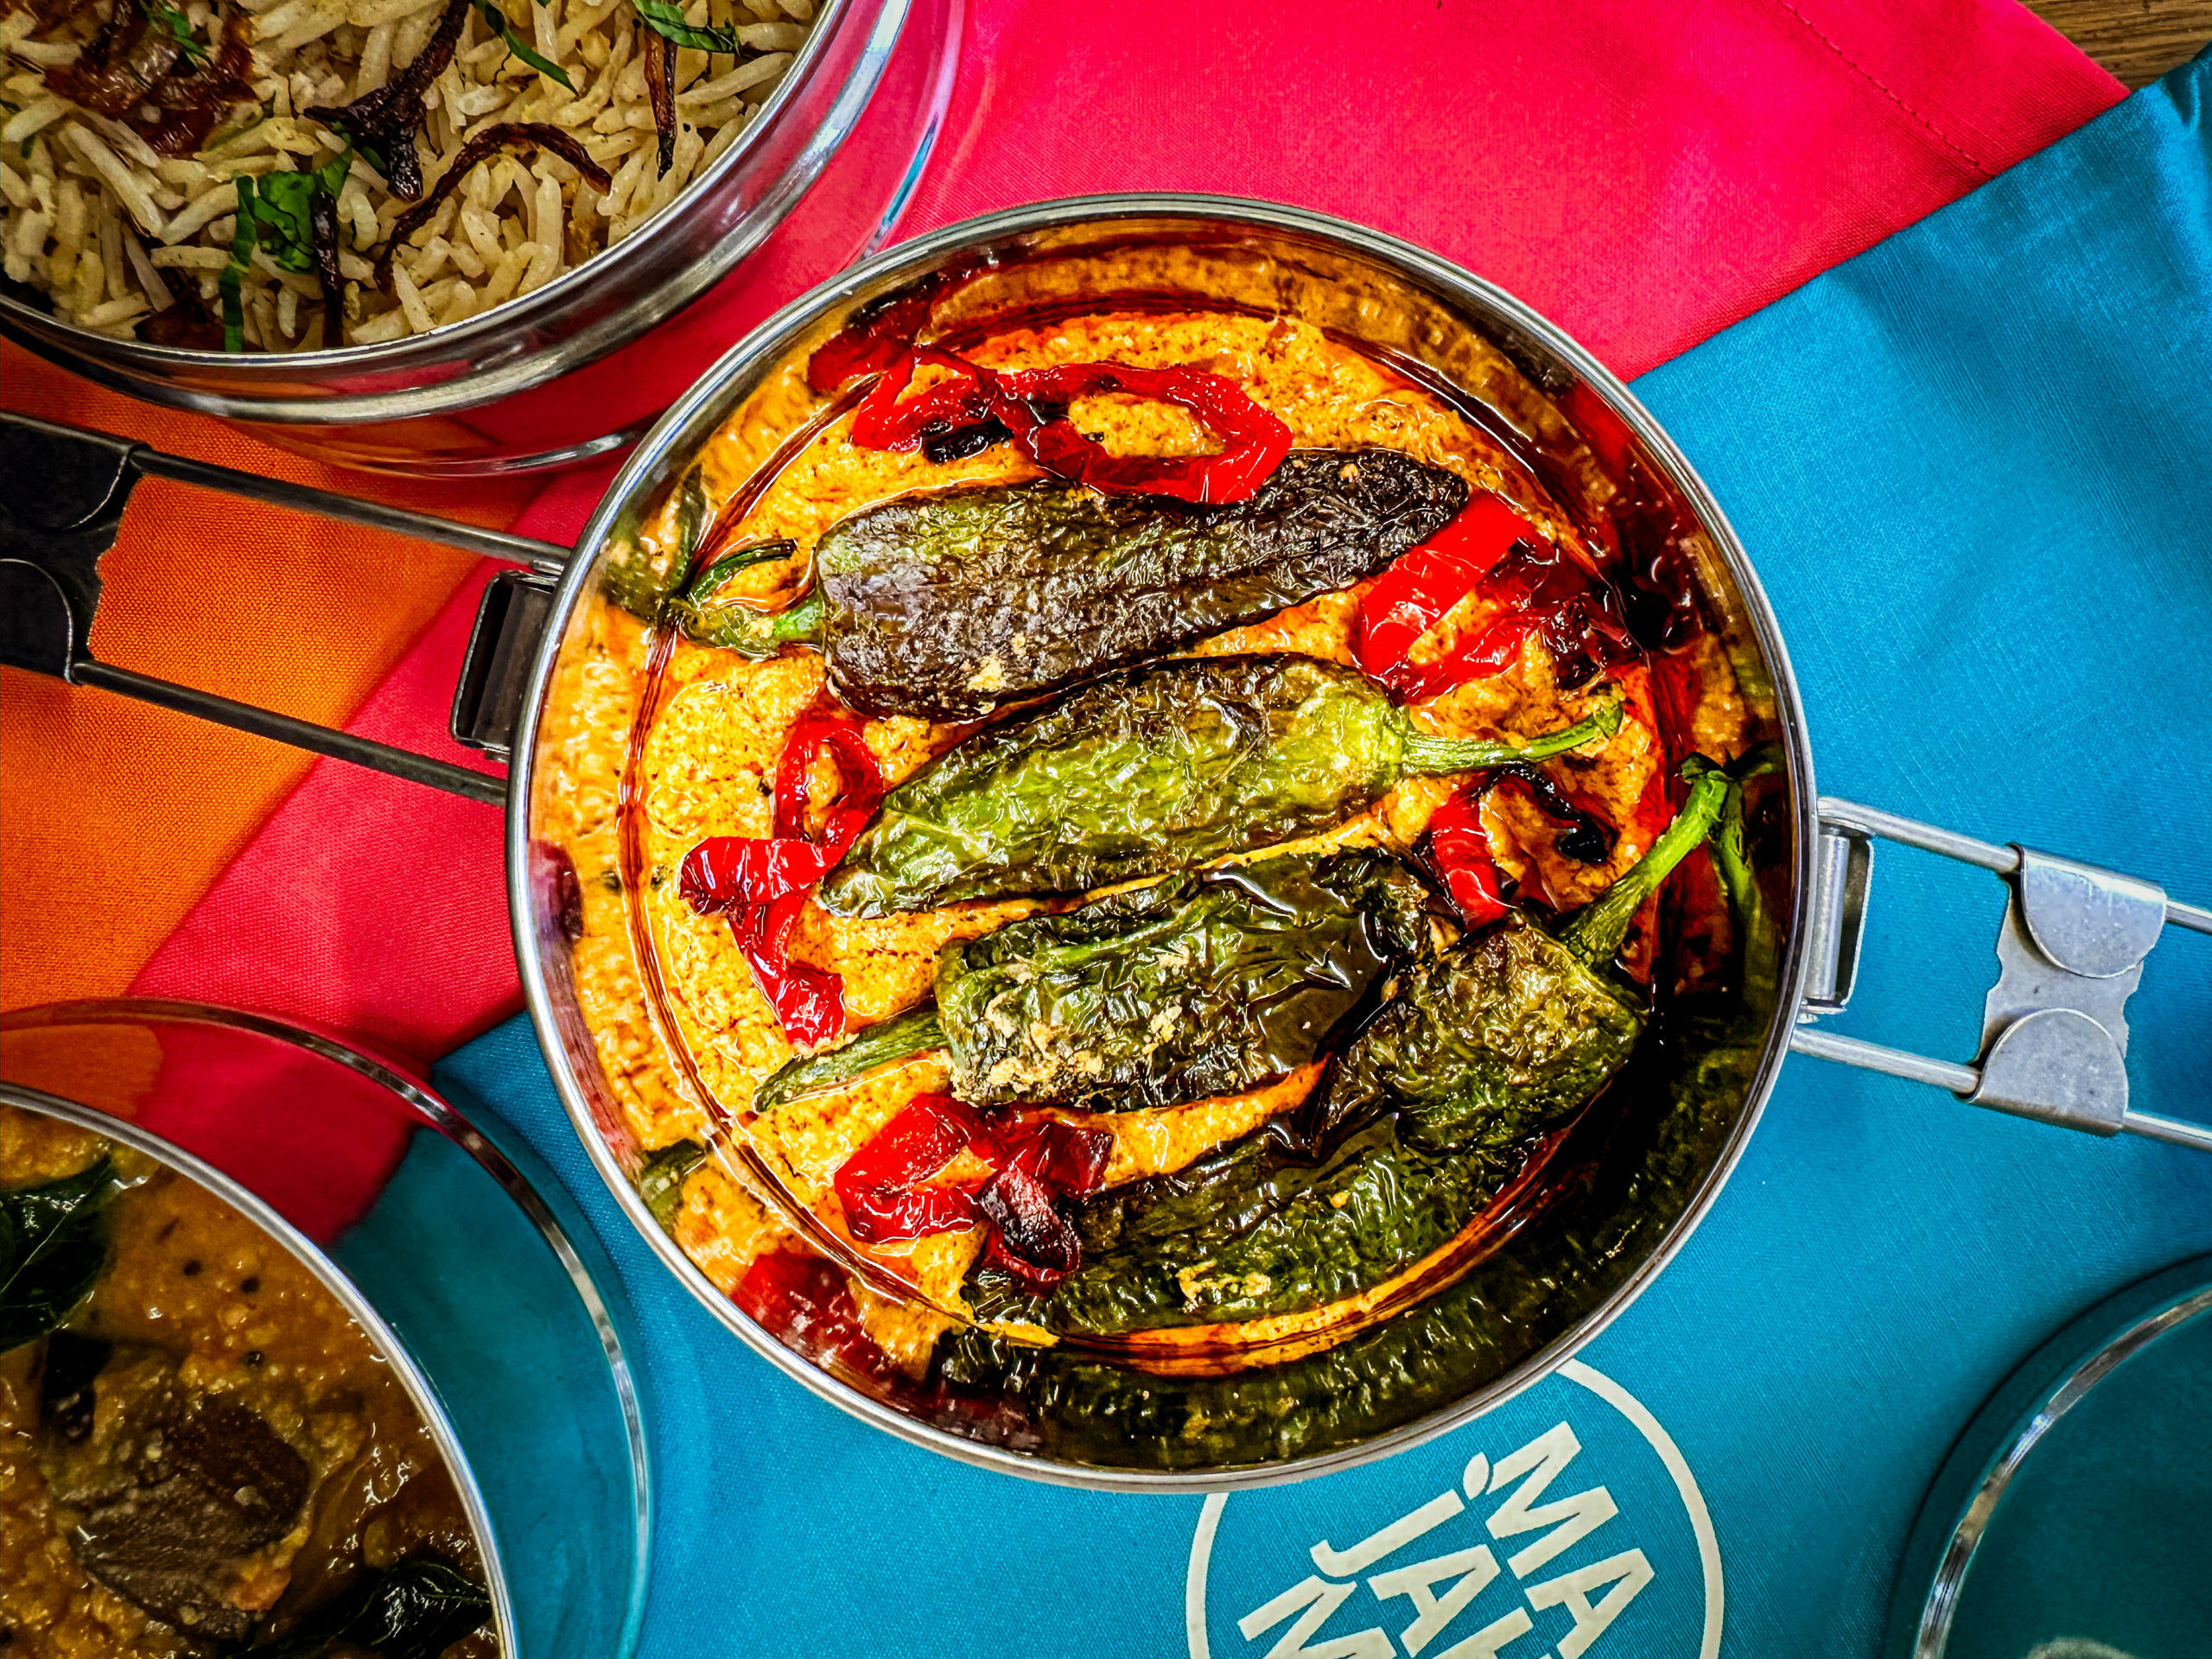 over head shot of Majahma tiffin with yellow dish with peppers on the top